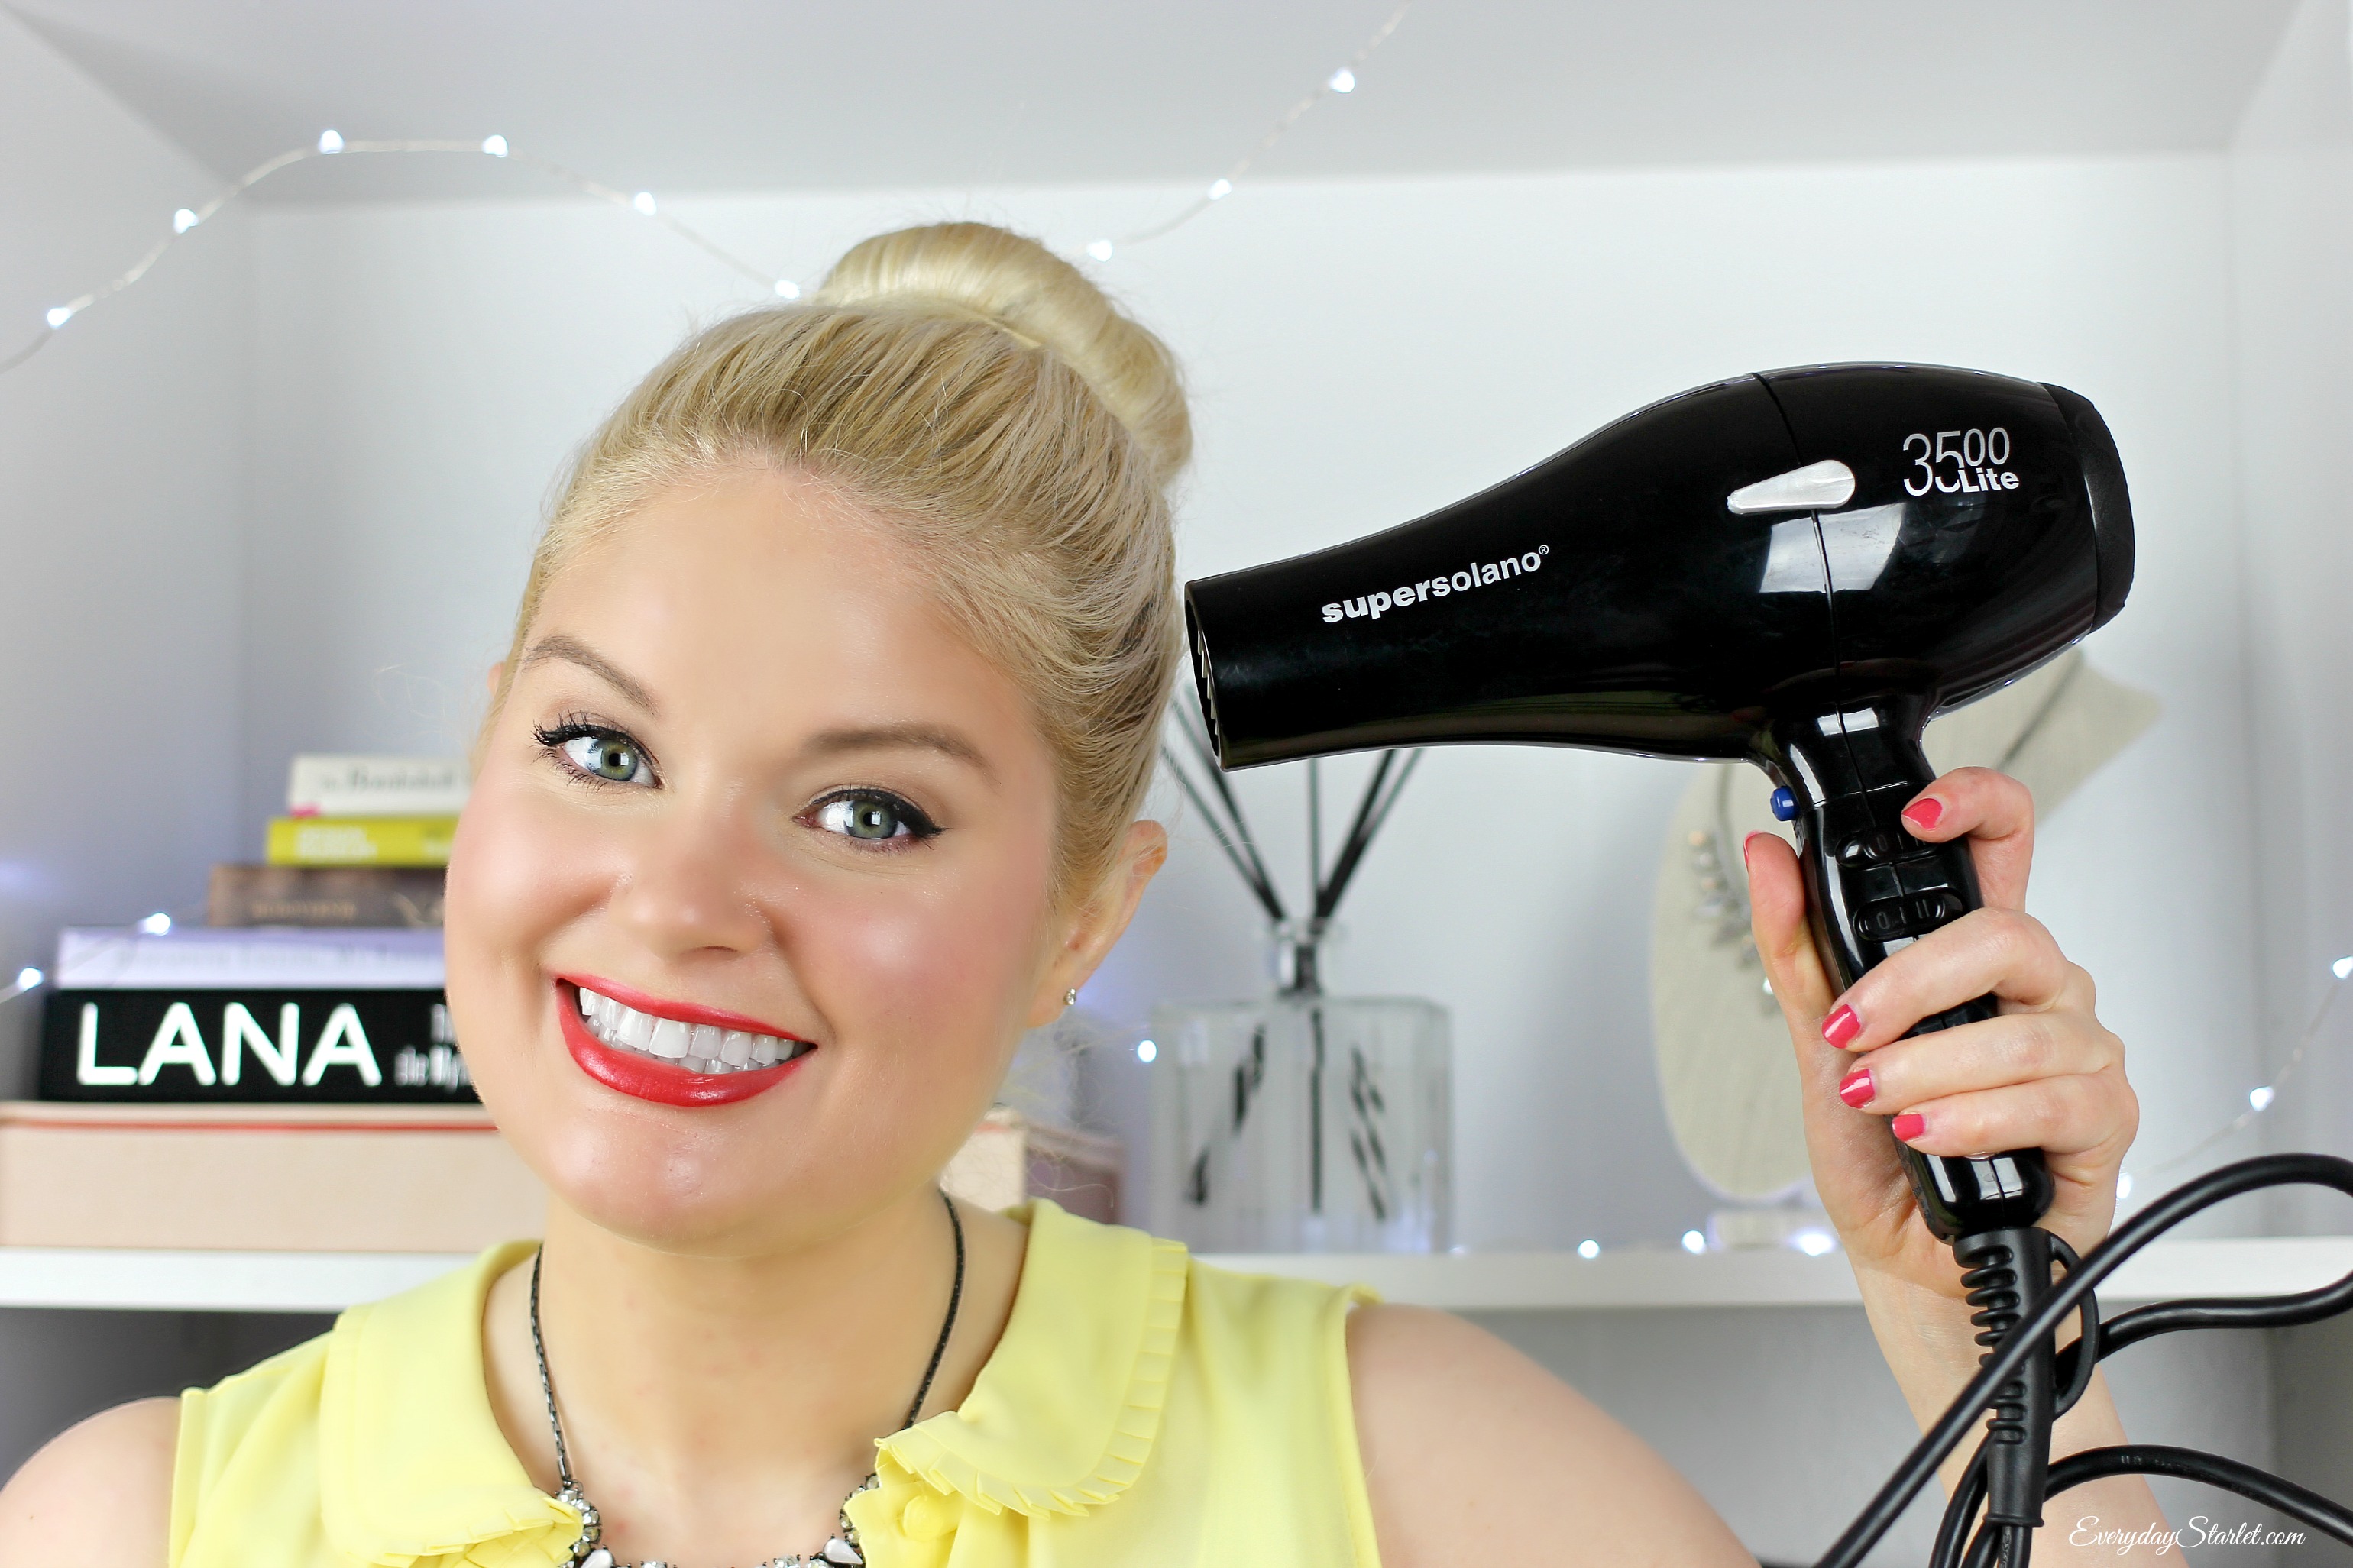 My Favorite Hair Tools… and advice for picking the best ones for you!